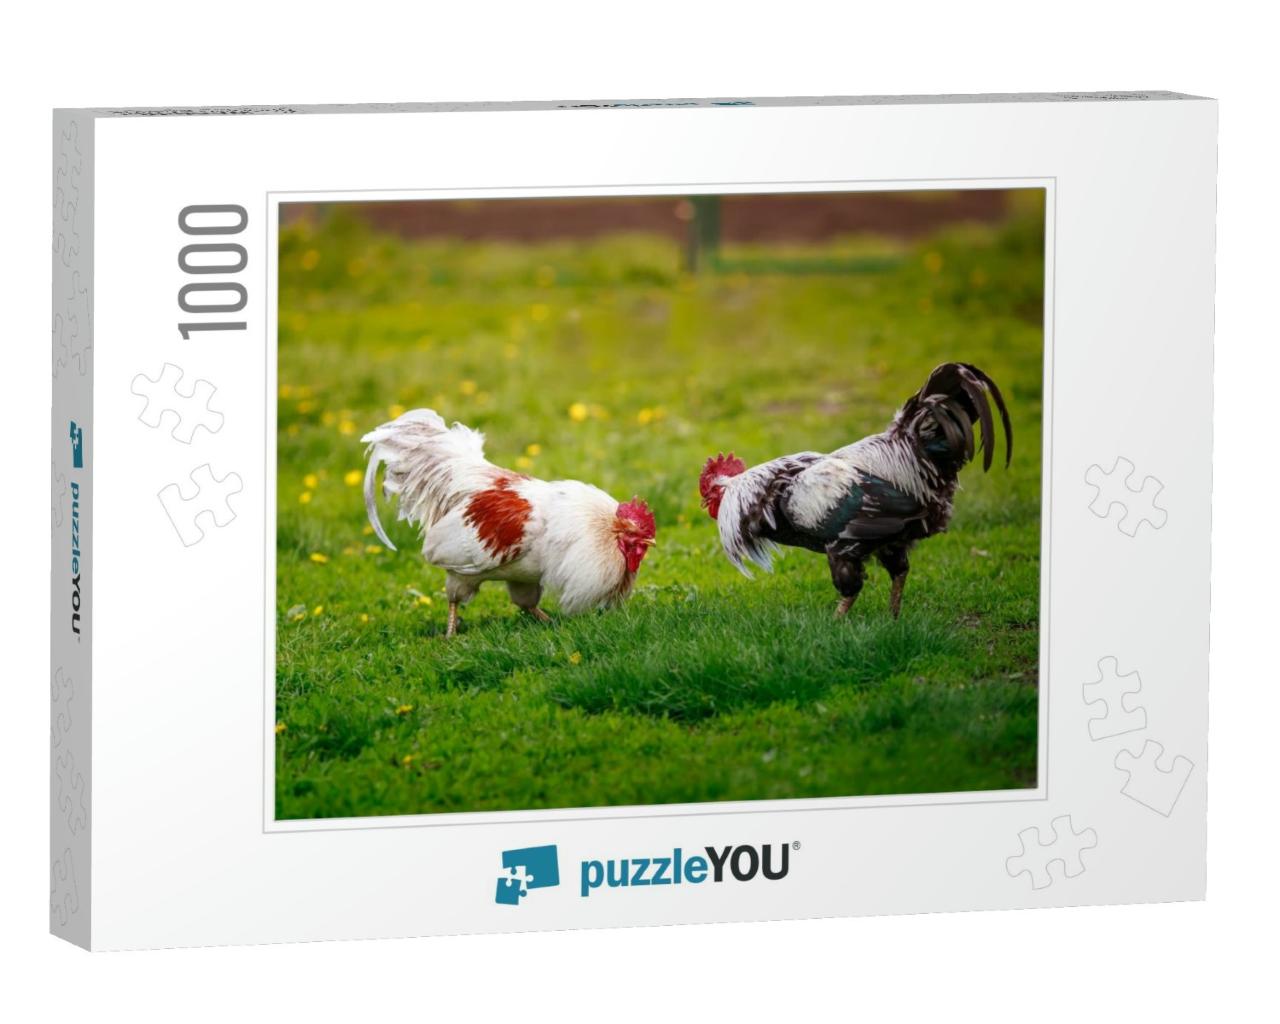 Two Roosters Black & White Fight on the Green Grass in th... Jigsaw Puzzle with 1000 pieces